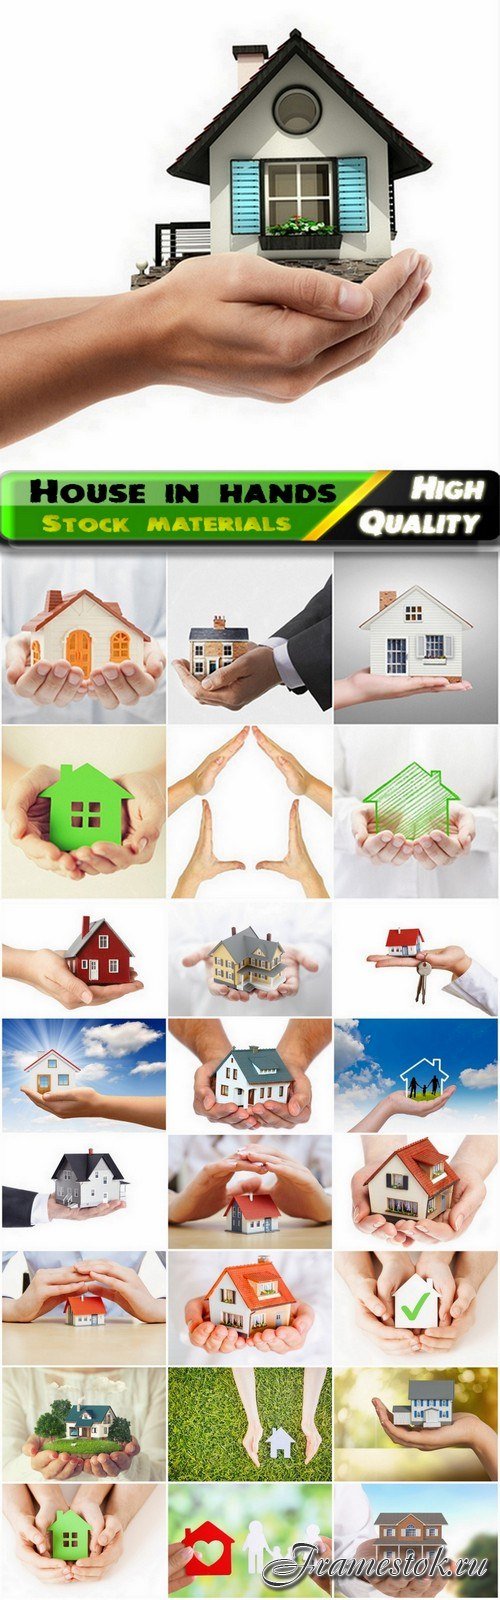 Trade in real estate and house in hands - 25 HQ Jpg